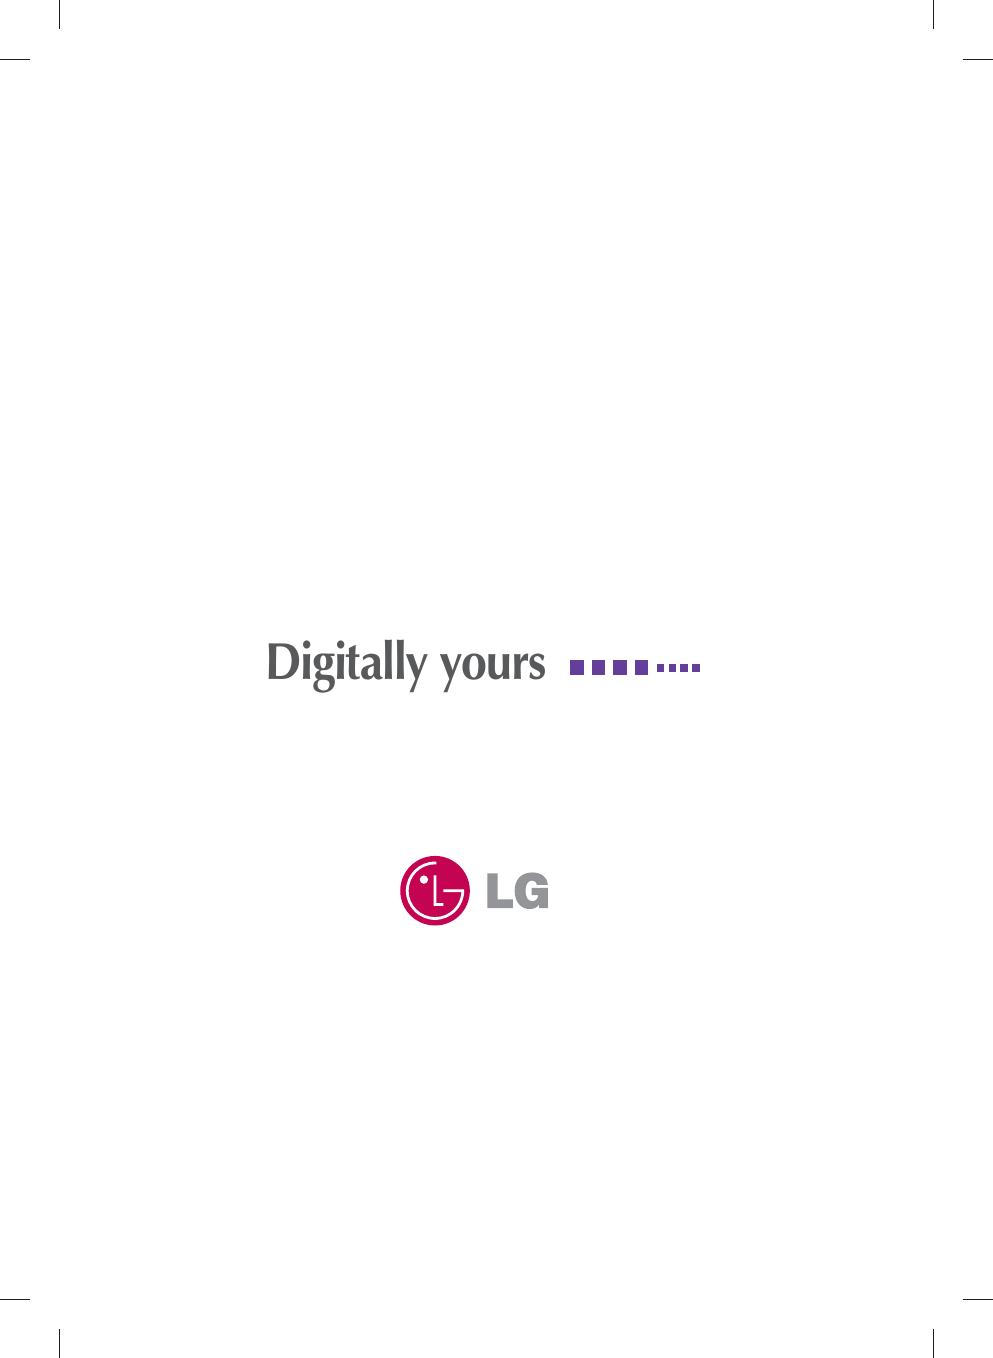 Digitally yours